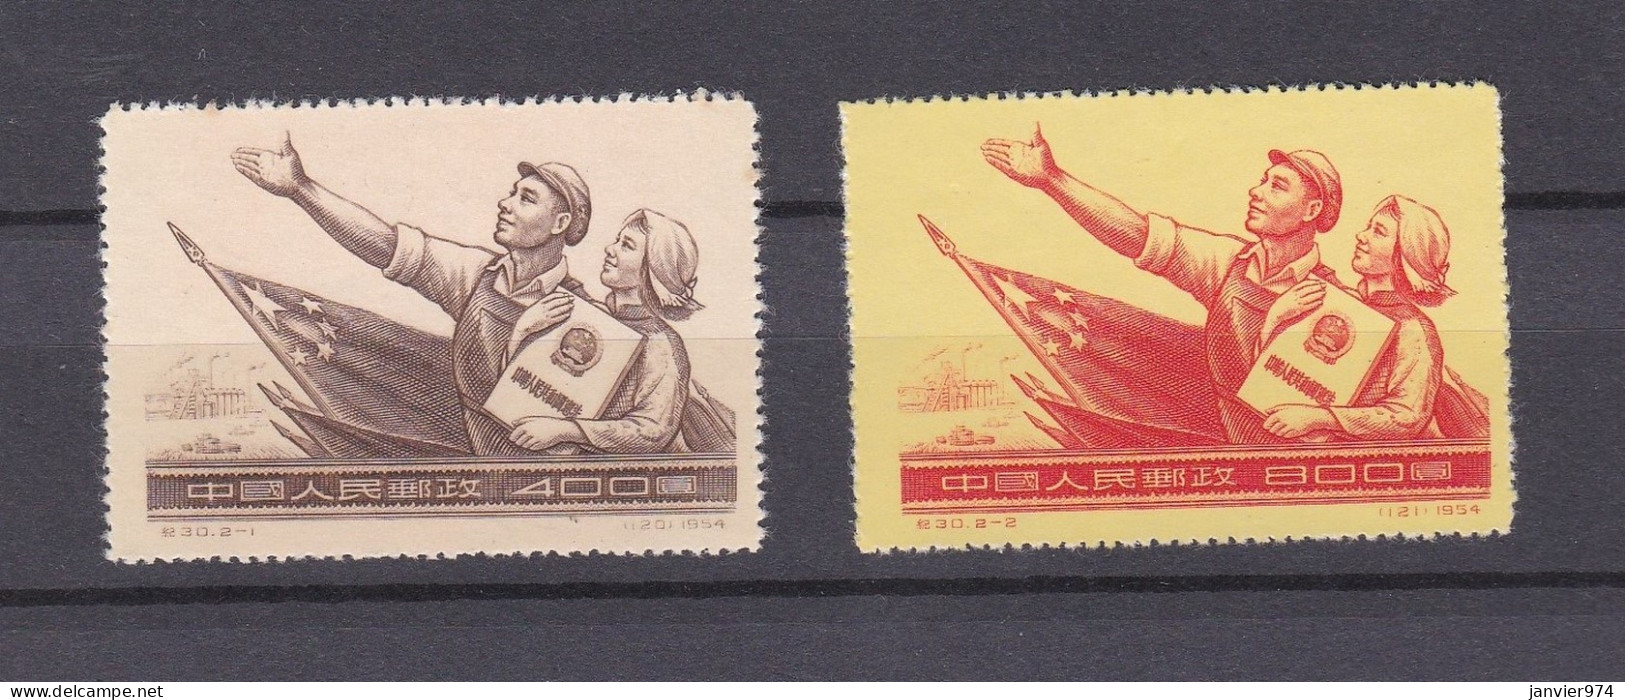 Chine 1954 , La Serie Complete, Nouvelle Constitution , 2 Timbres Neufs , 264 – 264  - Ongebruikt